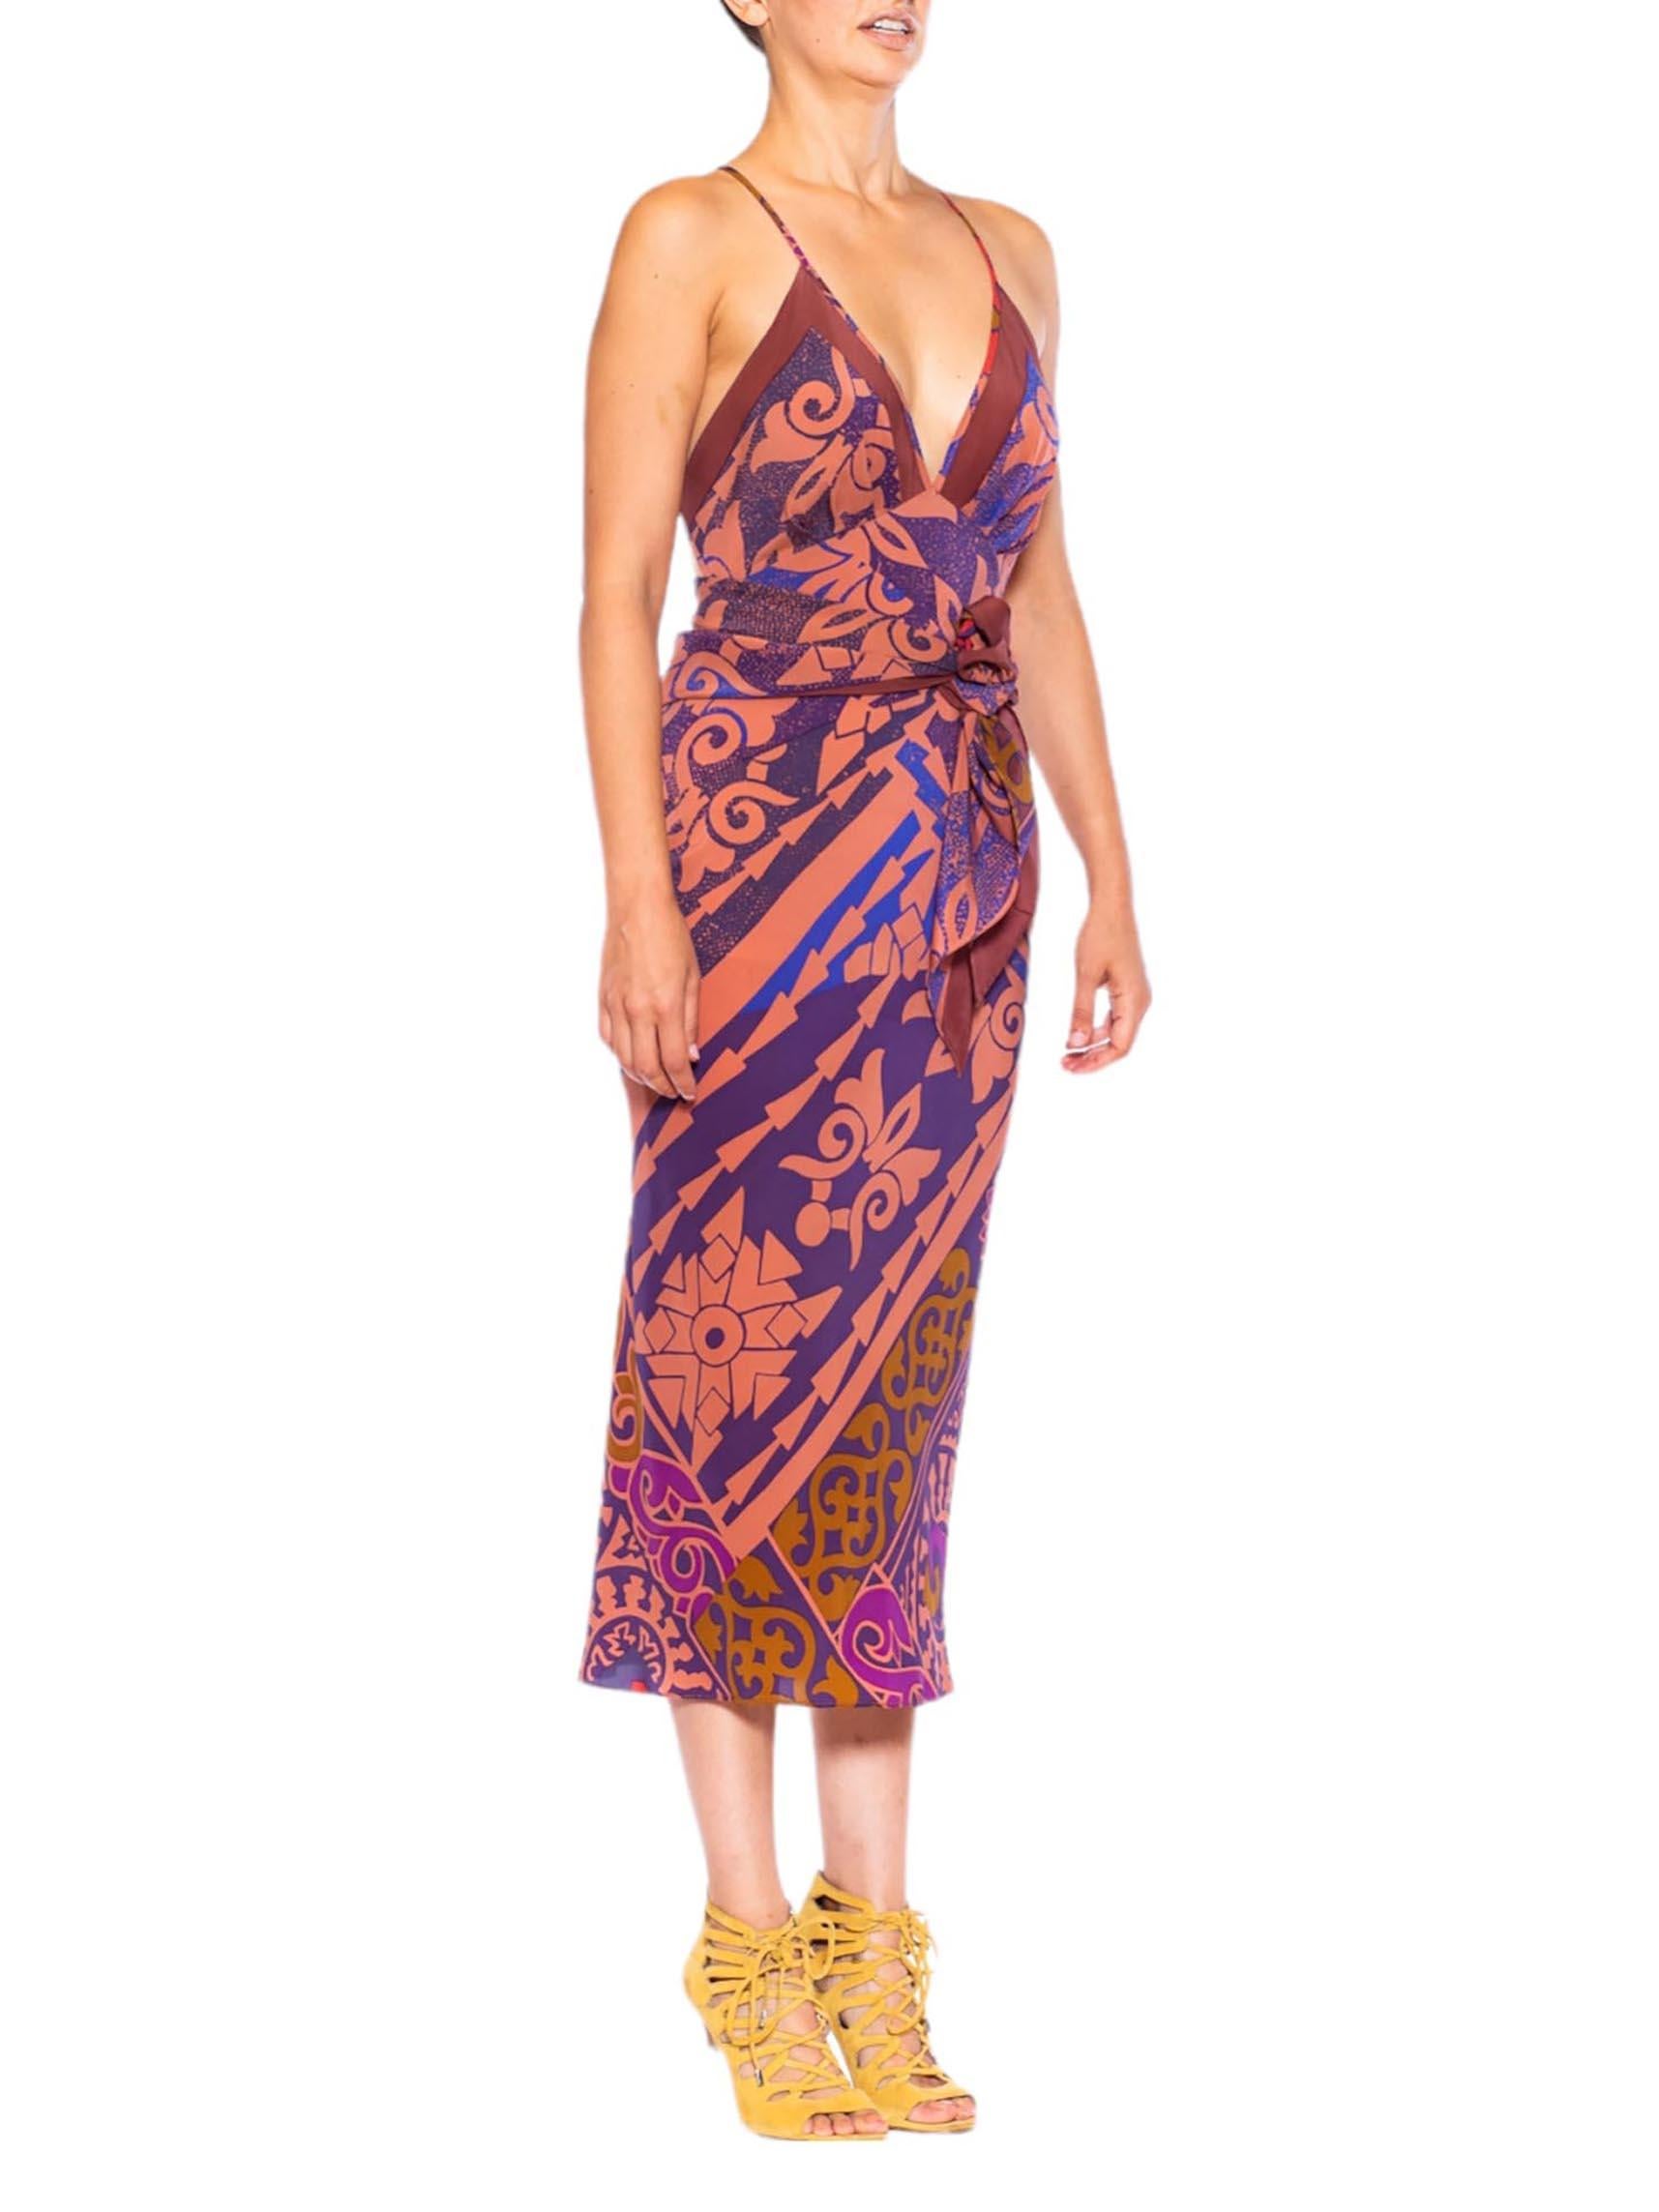 MORPHEW COLLECTION Blue Dusty Peach Silk Sagittarius One Scarf Dress Made From  For Sale 4